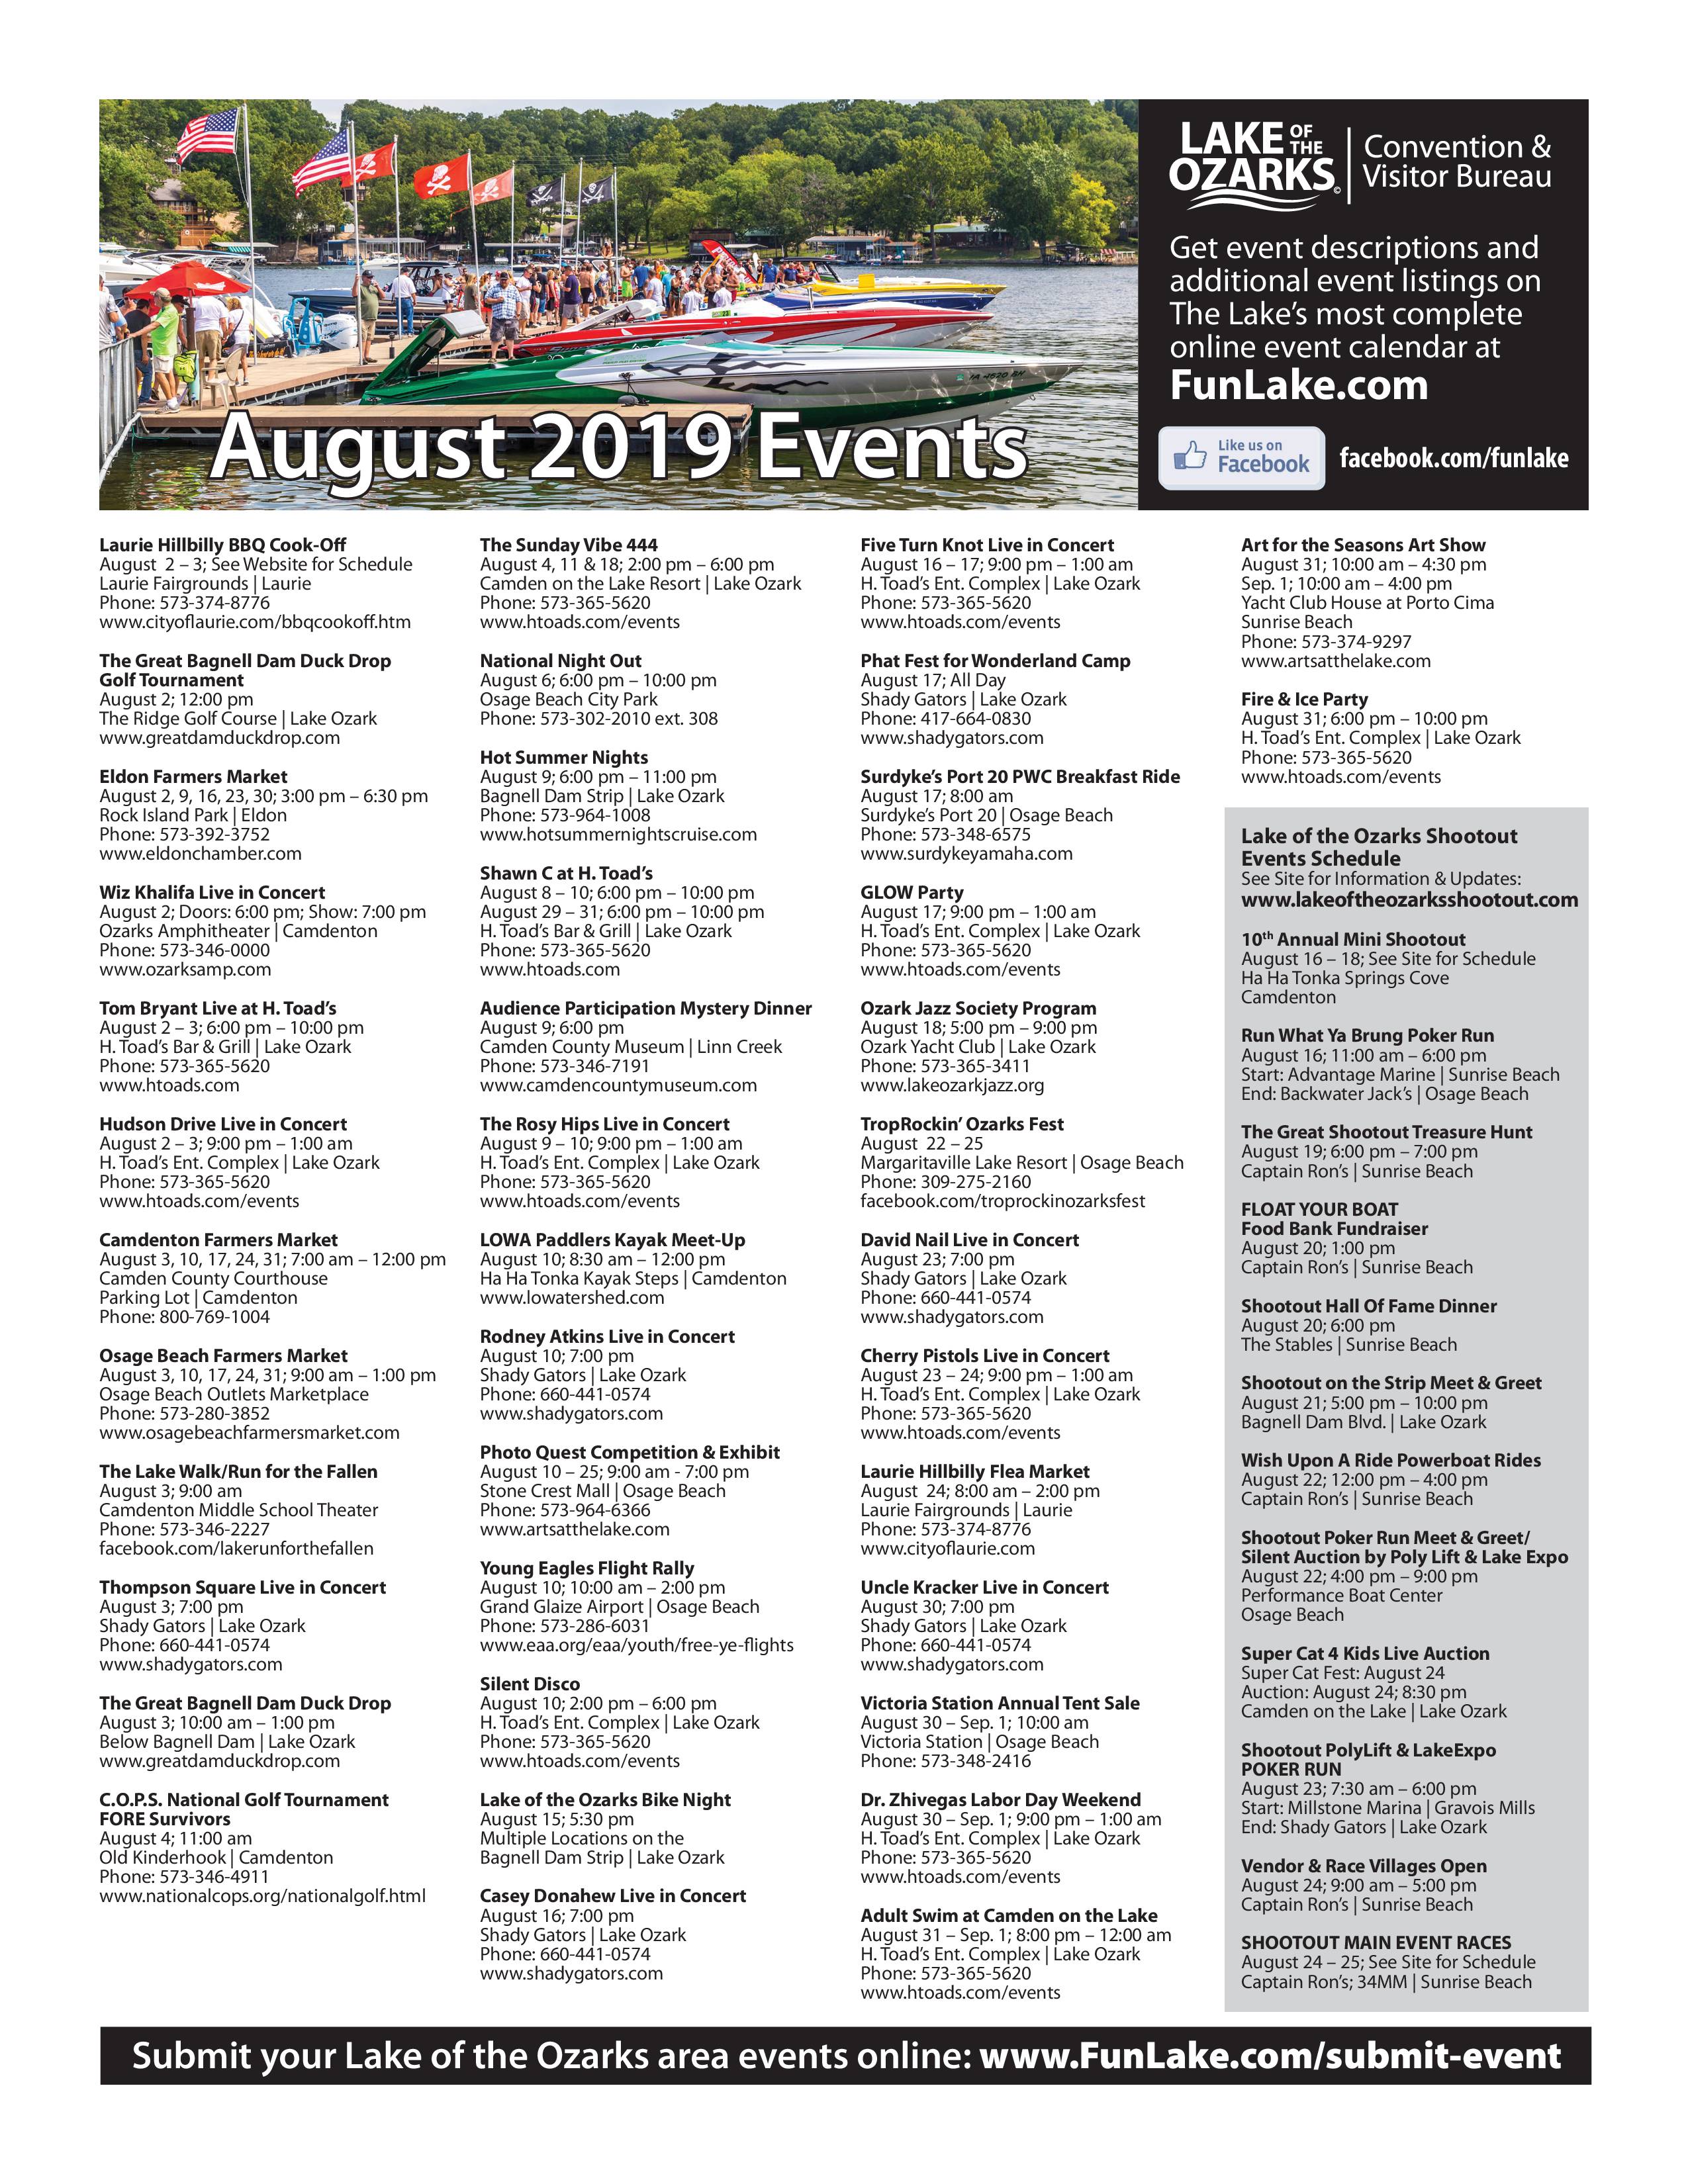 LAKE OF THE OZARKS AUGUST 2019 EVENTS CALENDAR G and G Marina